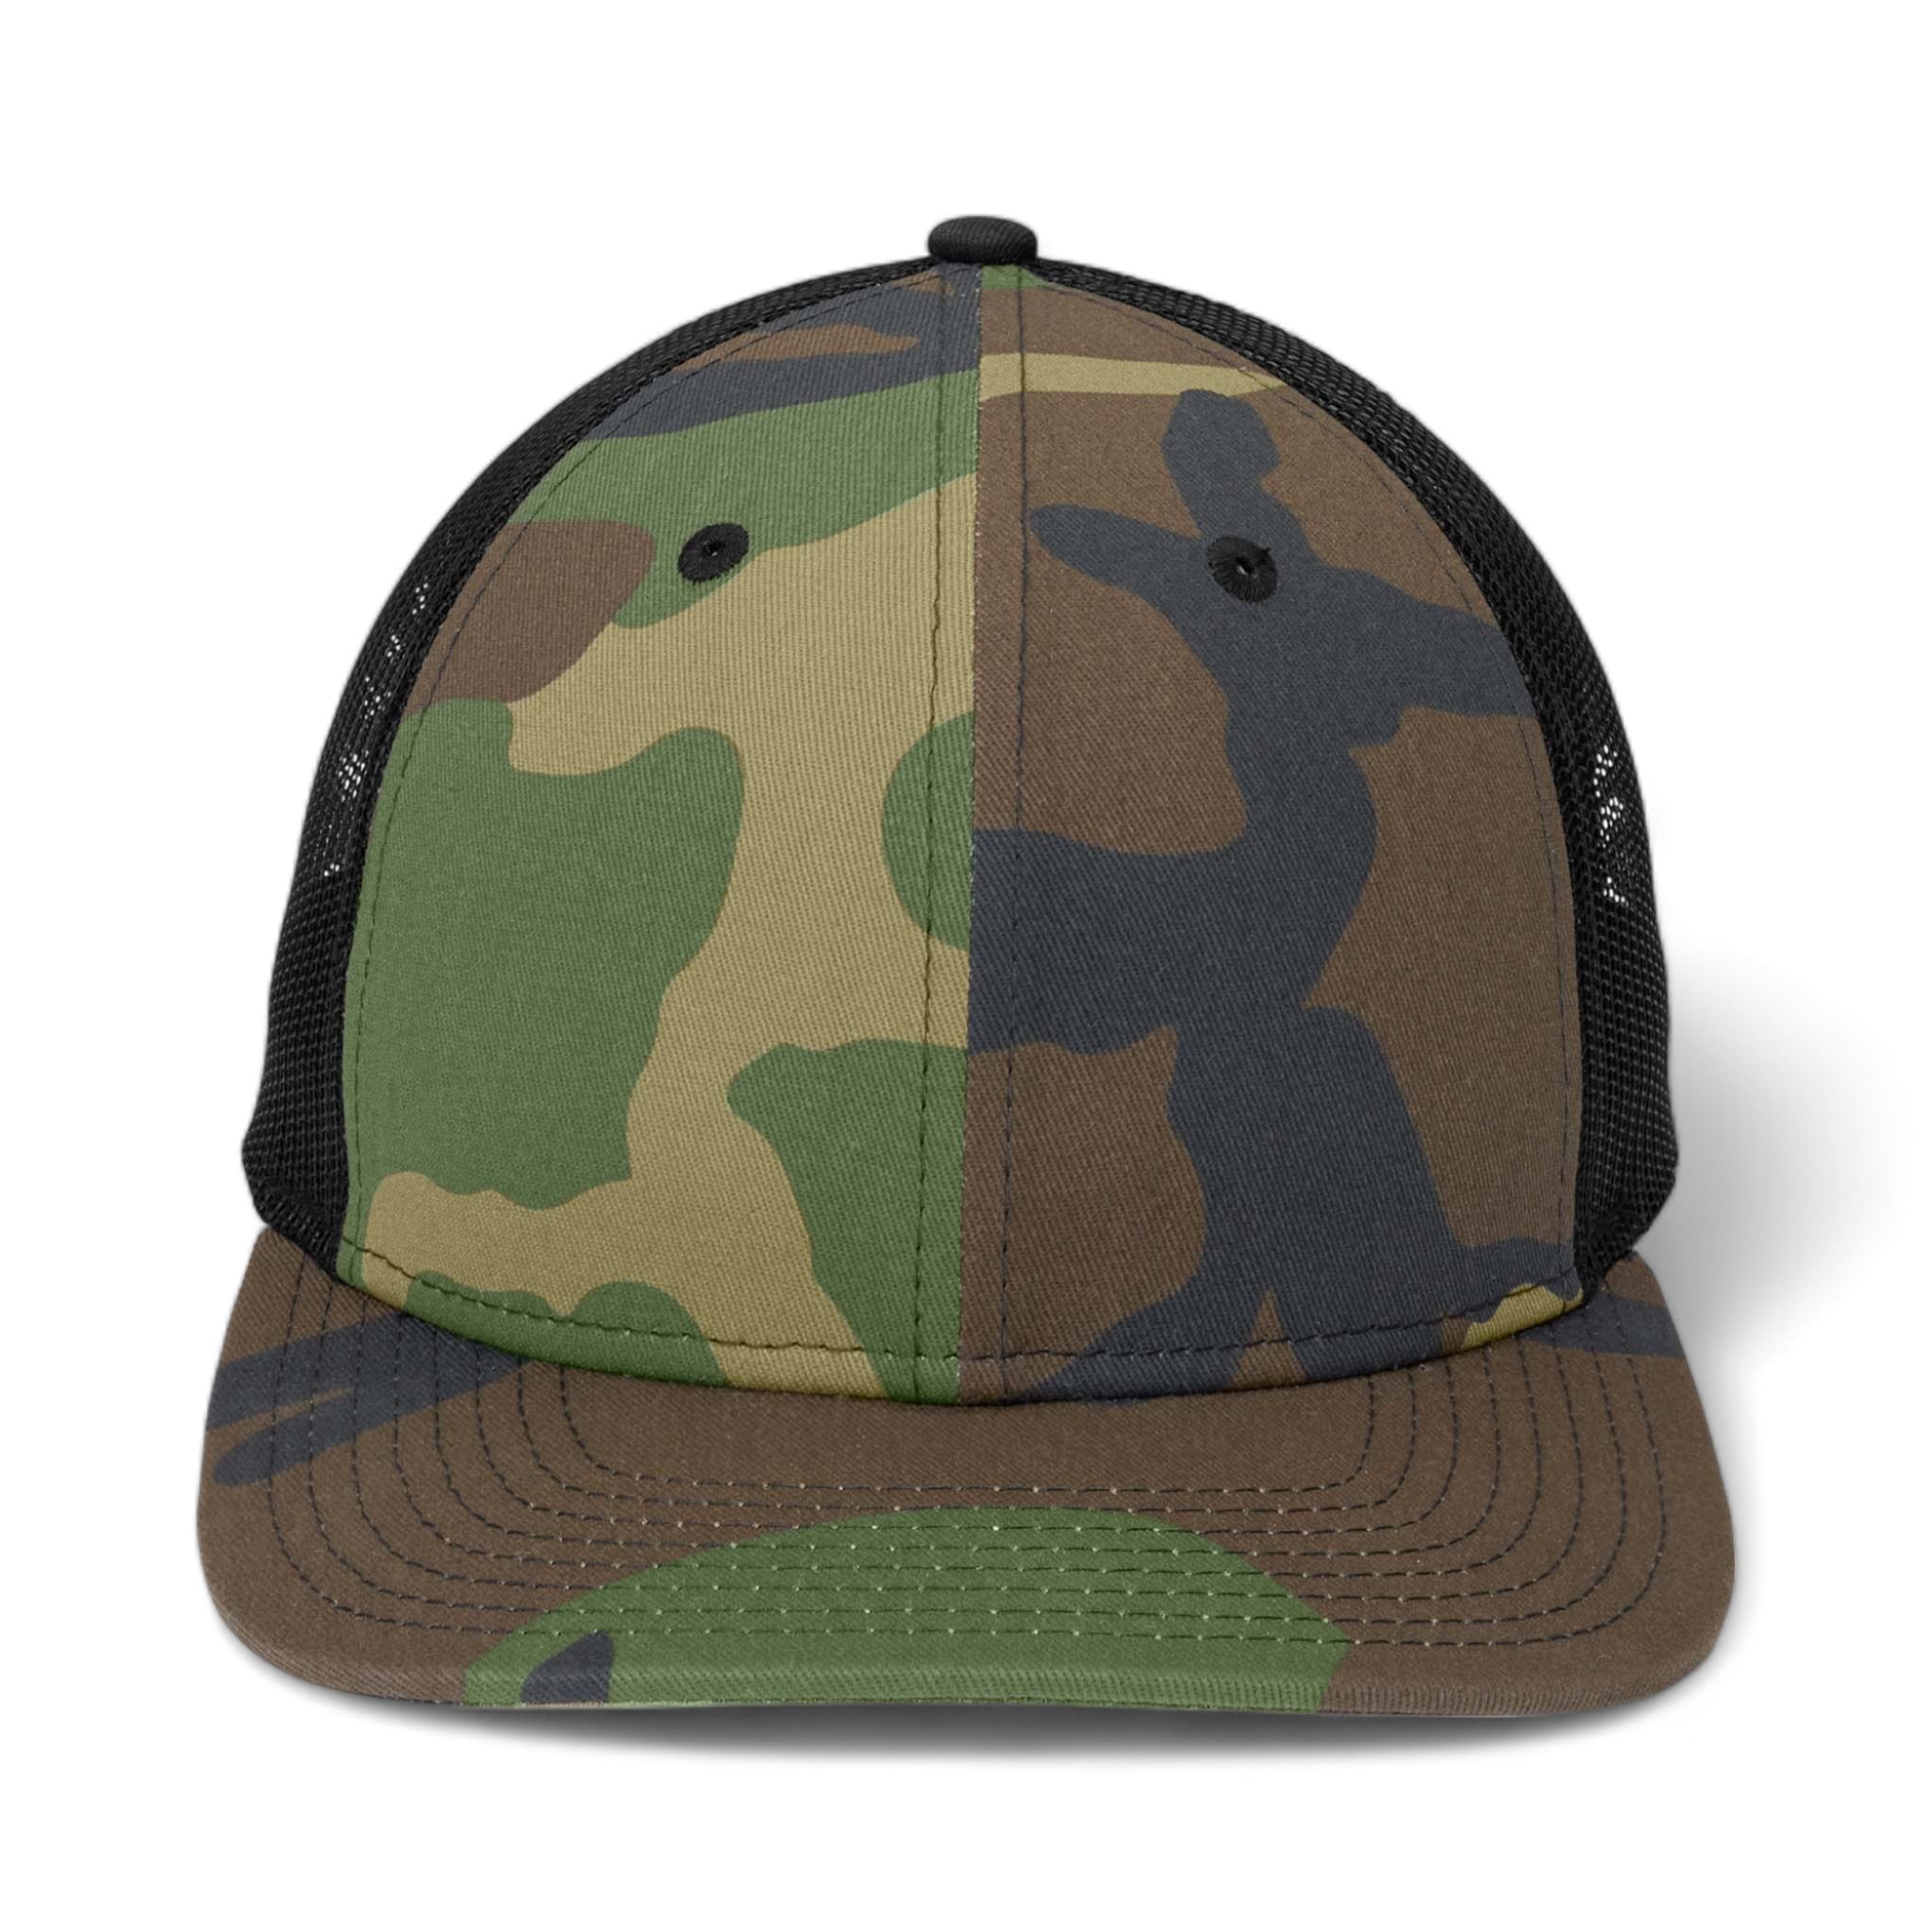 Front view of New Era NE207 custom hat in camo and black